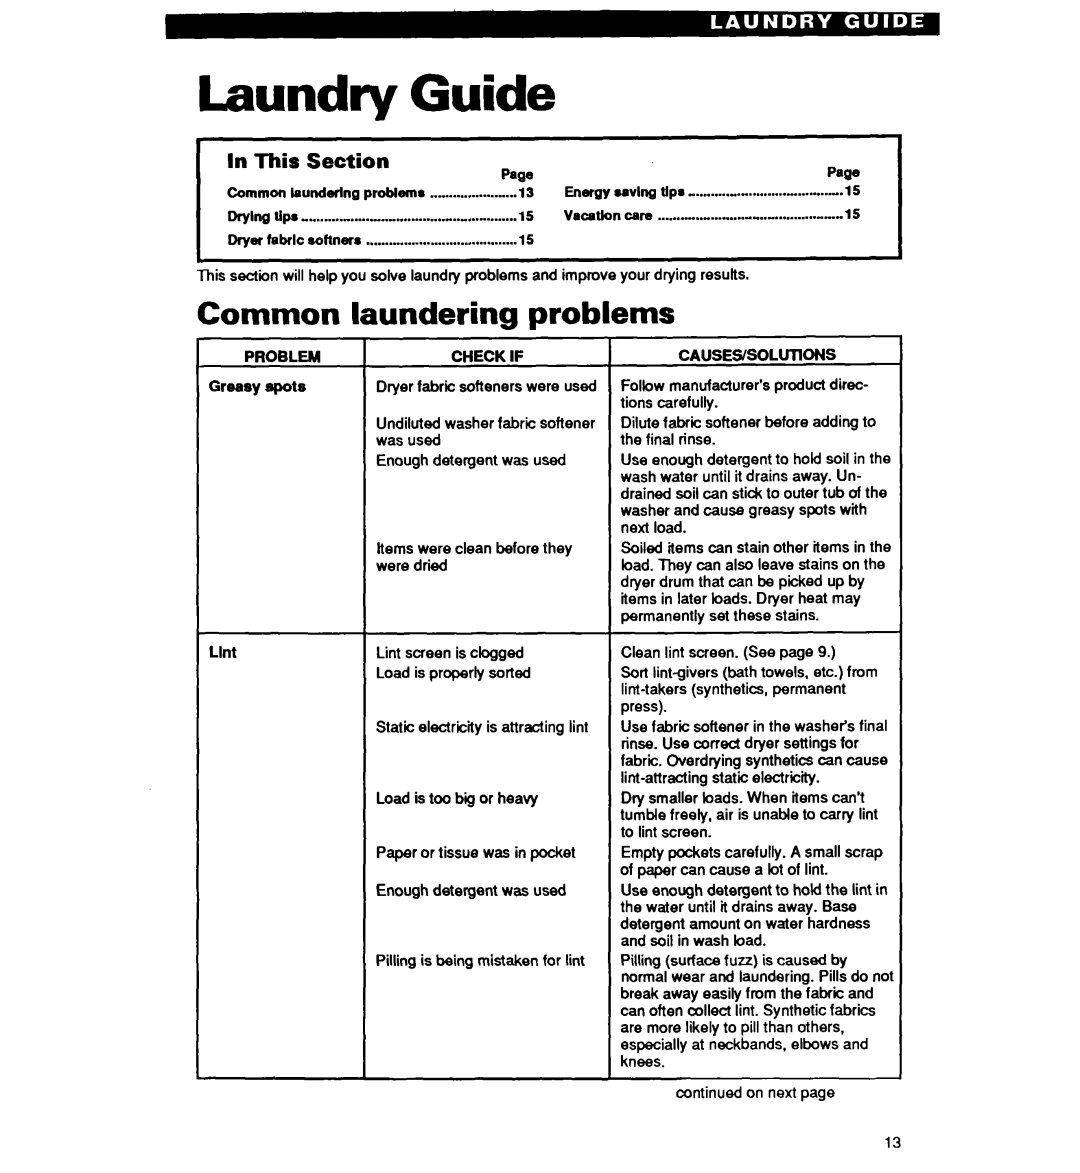 Whirlpool Gl2020W, GL3030W, EL2020W, EL3030W Guide, Common, laundering, Laundry, problems, Section, Page 